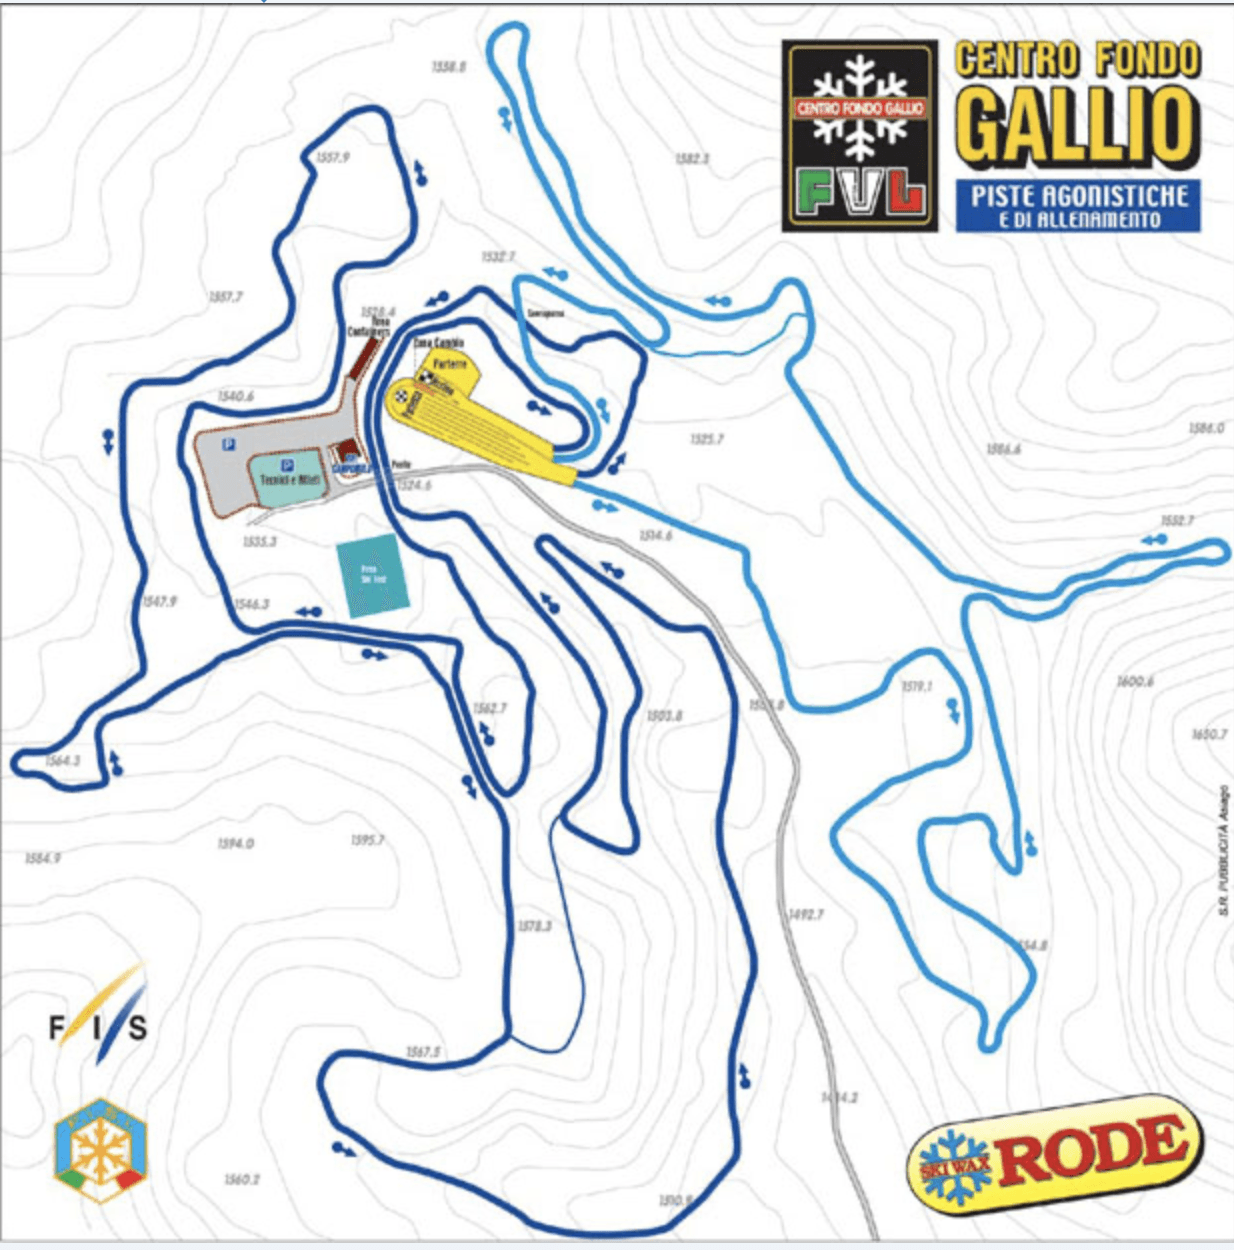 Gallio Competitive cross country ski map